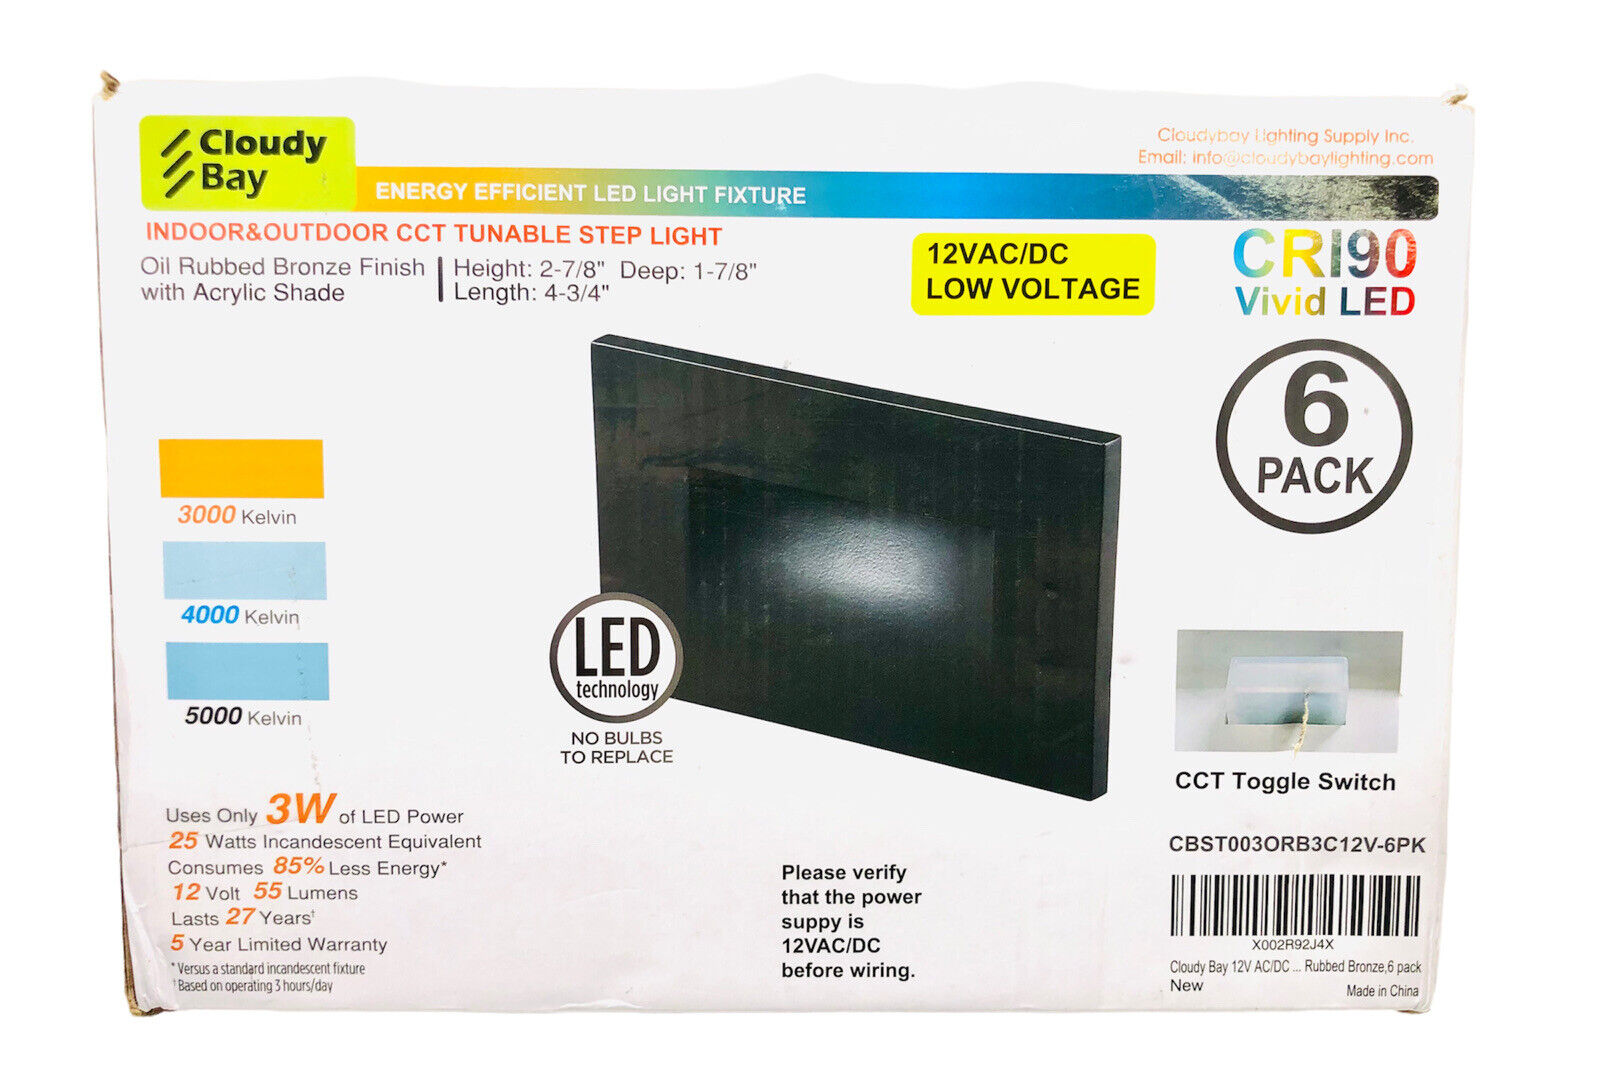 Cloudy Bay Energy Efficient LED Light Fixture 4 3/4”x2 7/8” 6 pack New Open Box